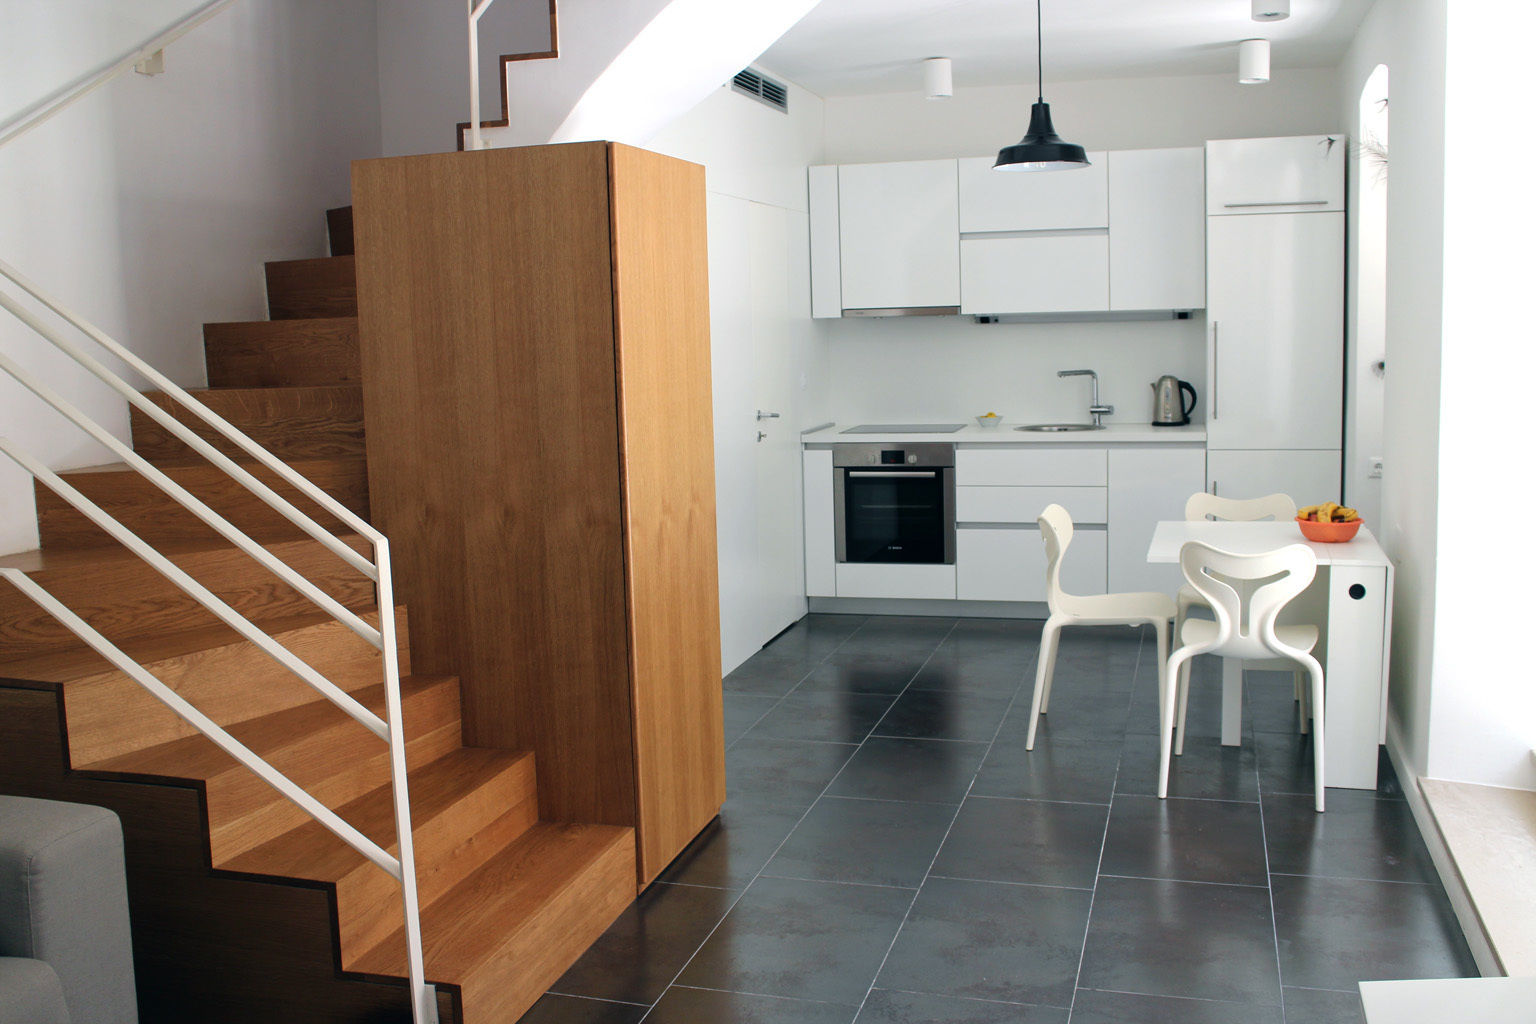 kitchen with the stairs in the left corner: minimalist by drawing agency ltd, Minimalist